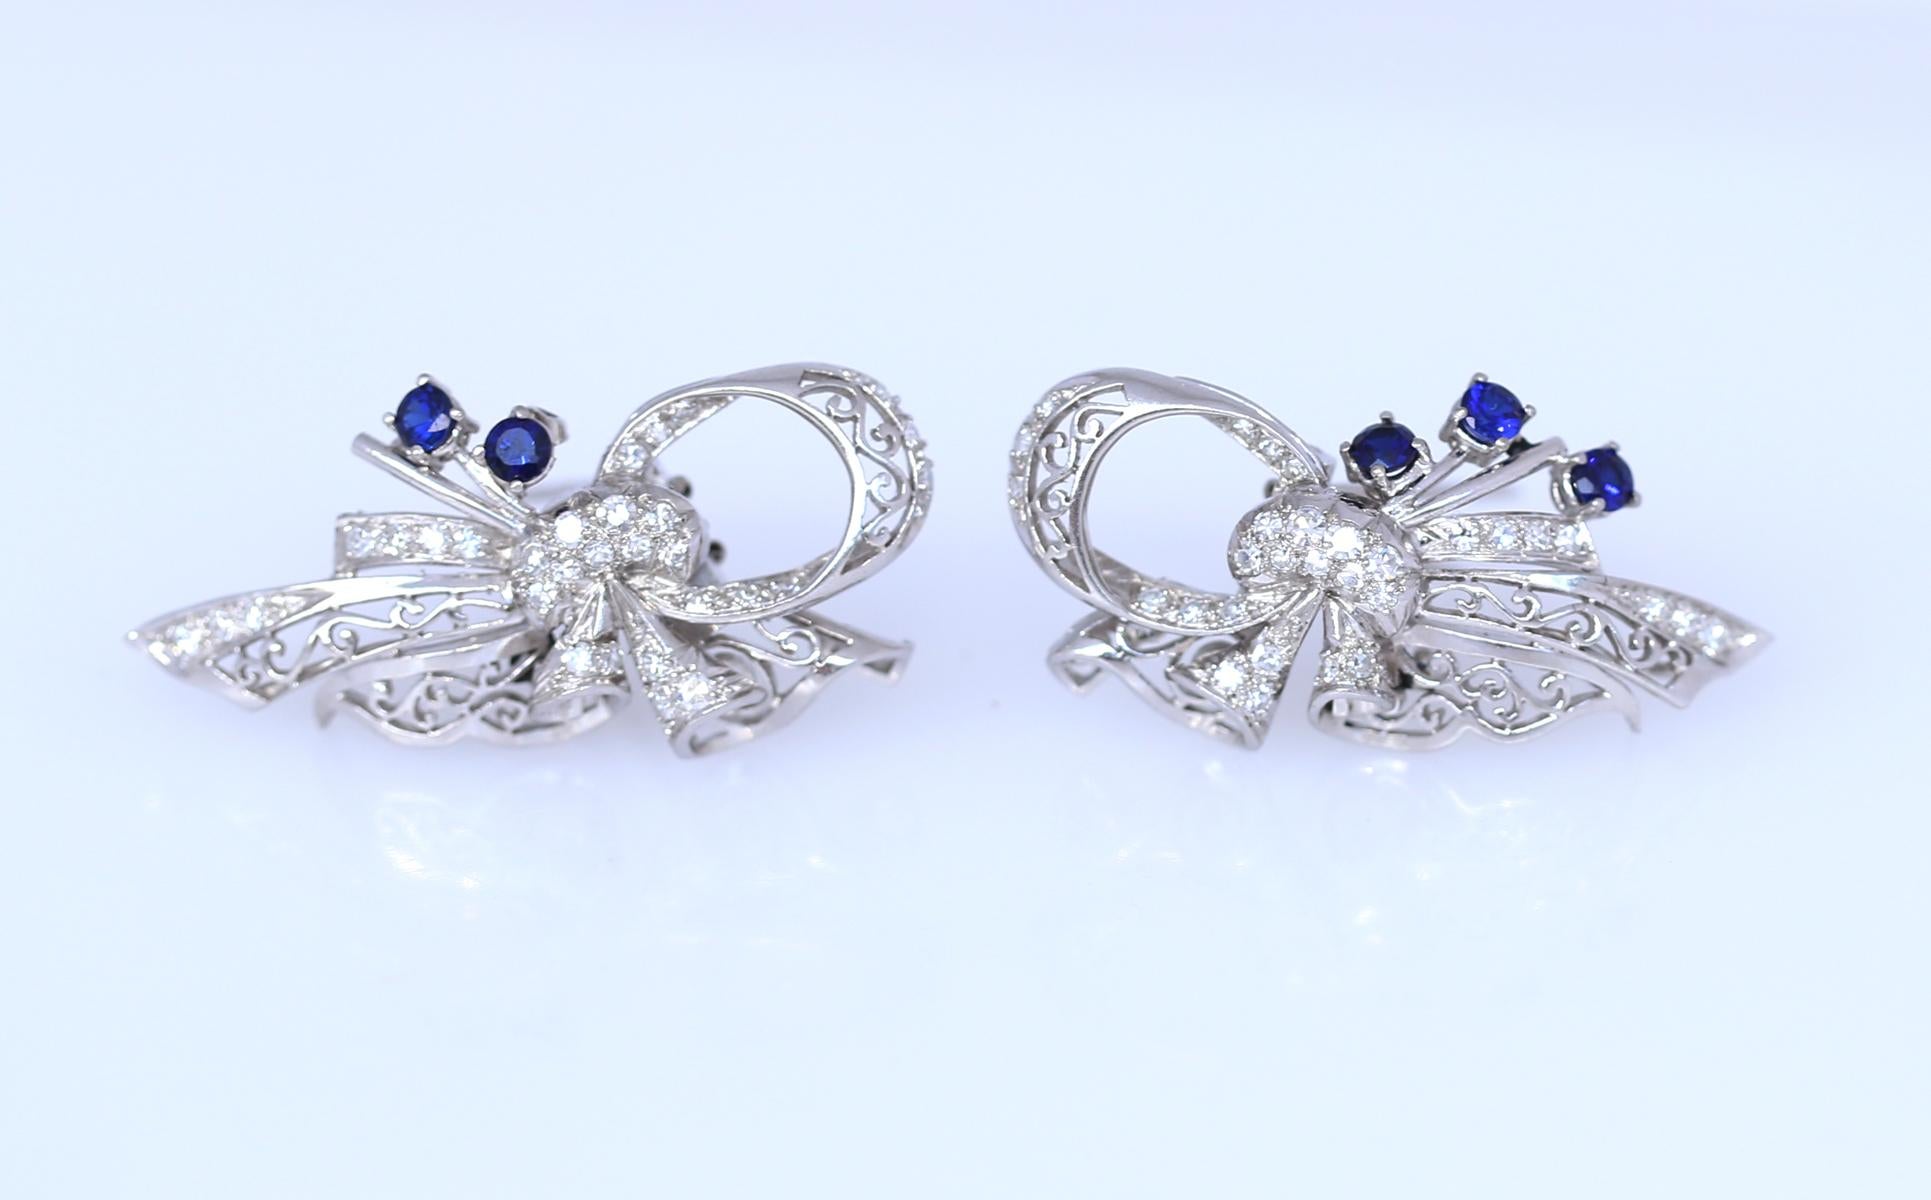 A pair of Platinum Brooches Sapphires Diamonds was created in 1930.
Set with fine Diamonds and Sapphires. Depicting a ribbon of some kind of natural style. Amazing work of the jeweler, not only making fine shapes of natural origin but also